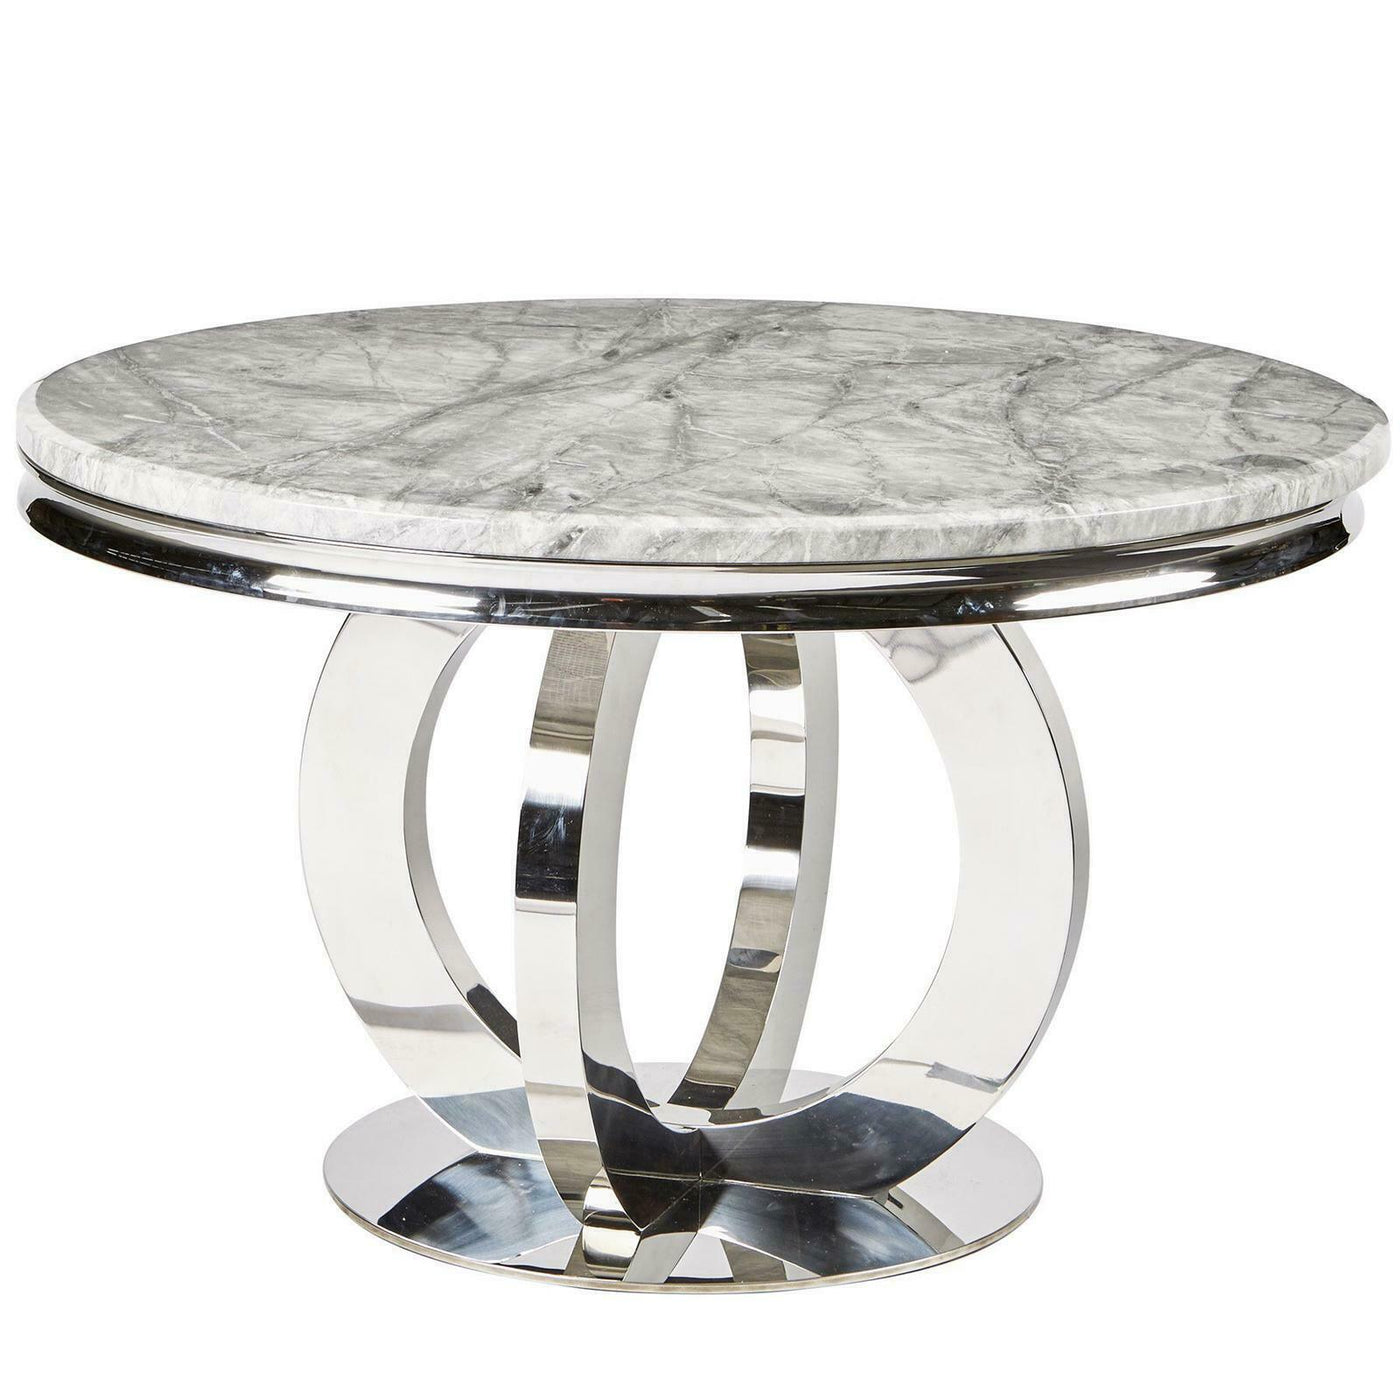 Chelsea 130cm Grey Marble Round Dining Table + Valente Grey Lion Button Chairs-Esme Furnishings